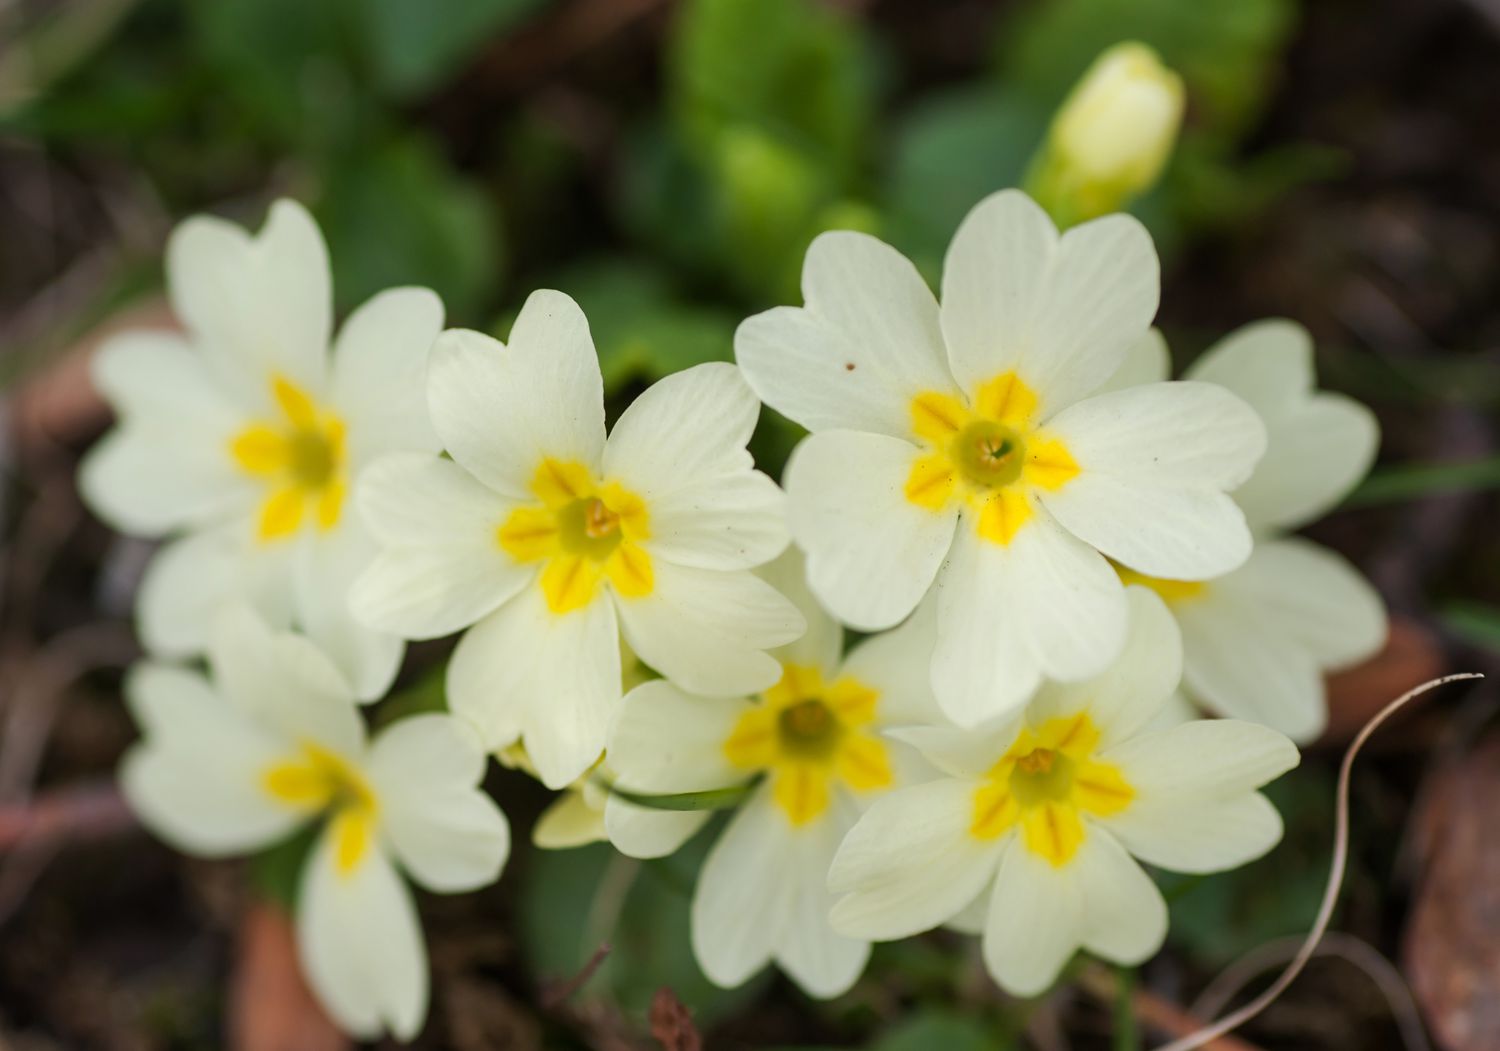 Primrose perennial flowers with white petals and yellow star-like centers closeup